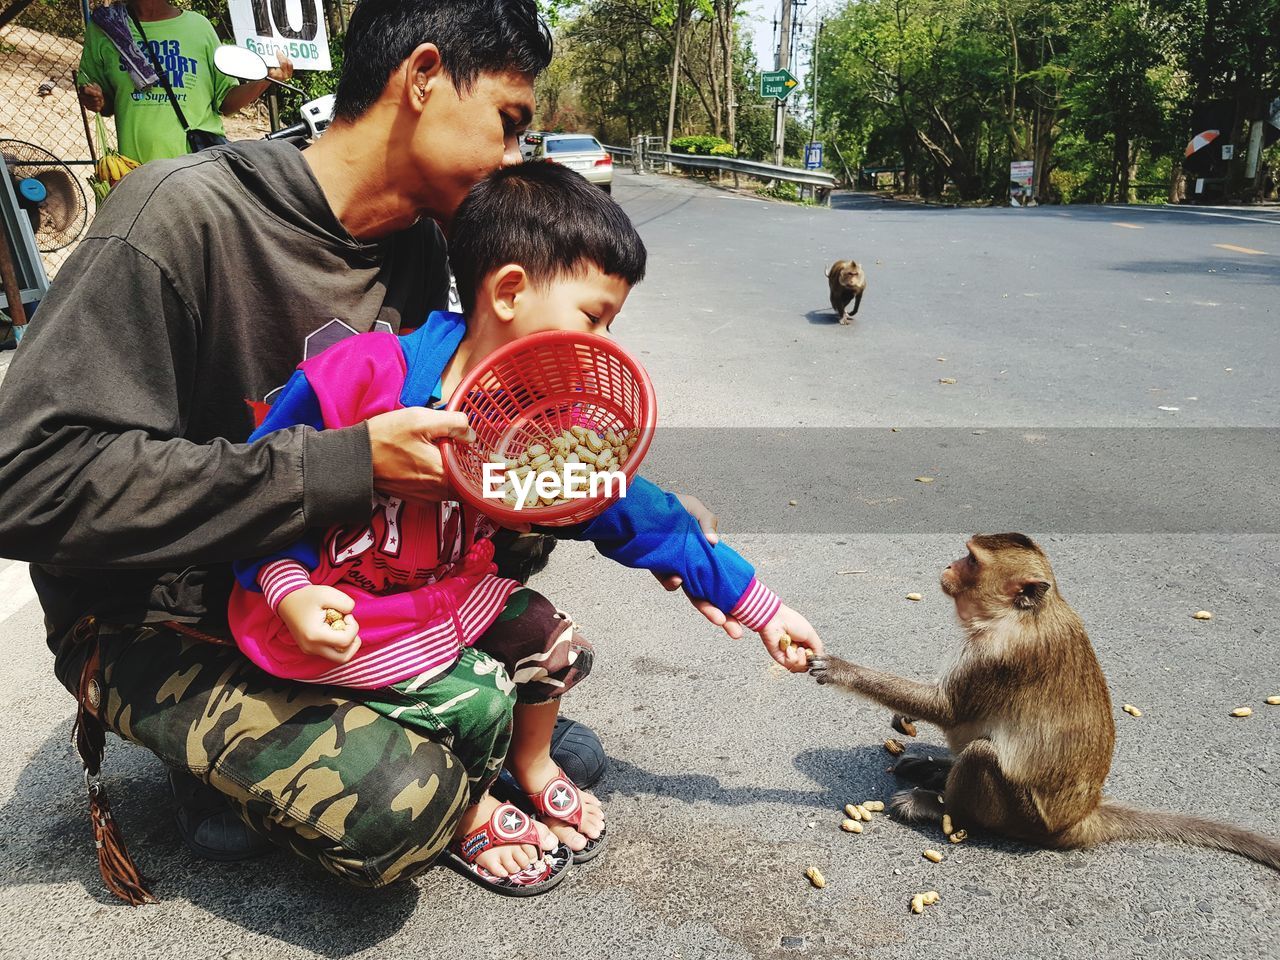 Father and son feeding monkey while crouching on road